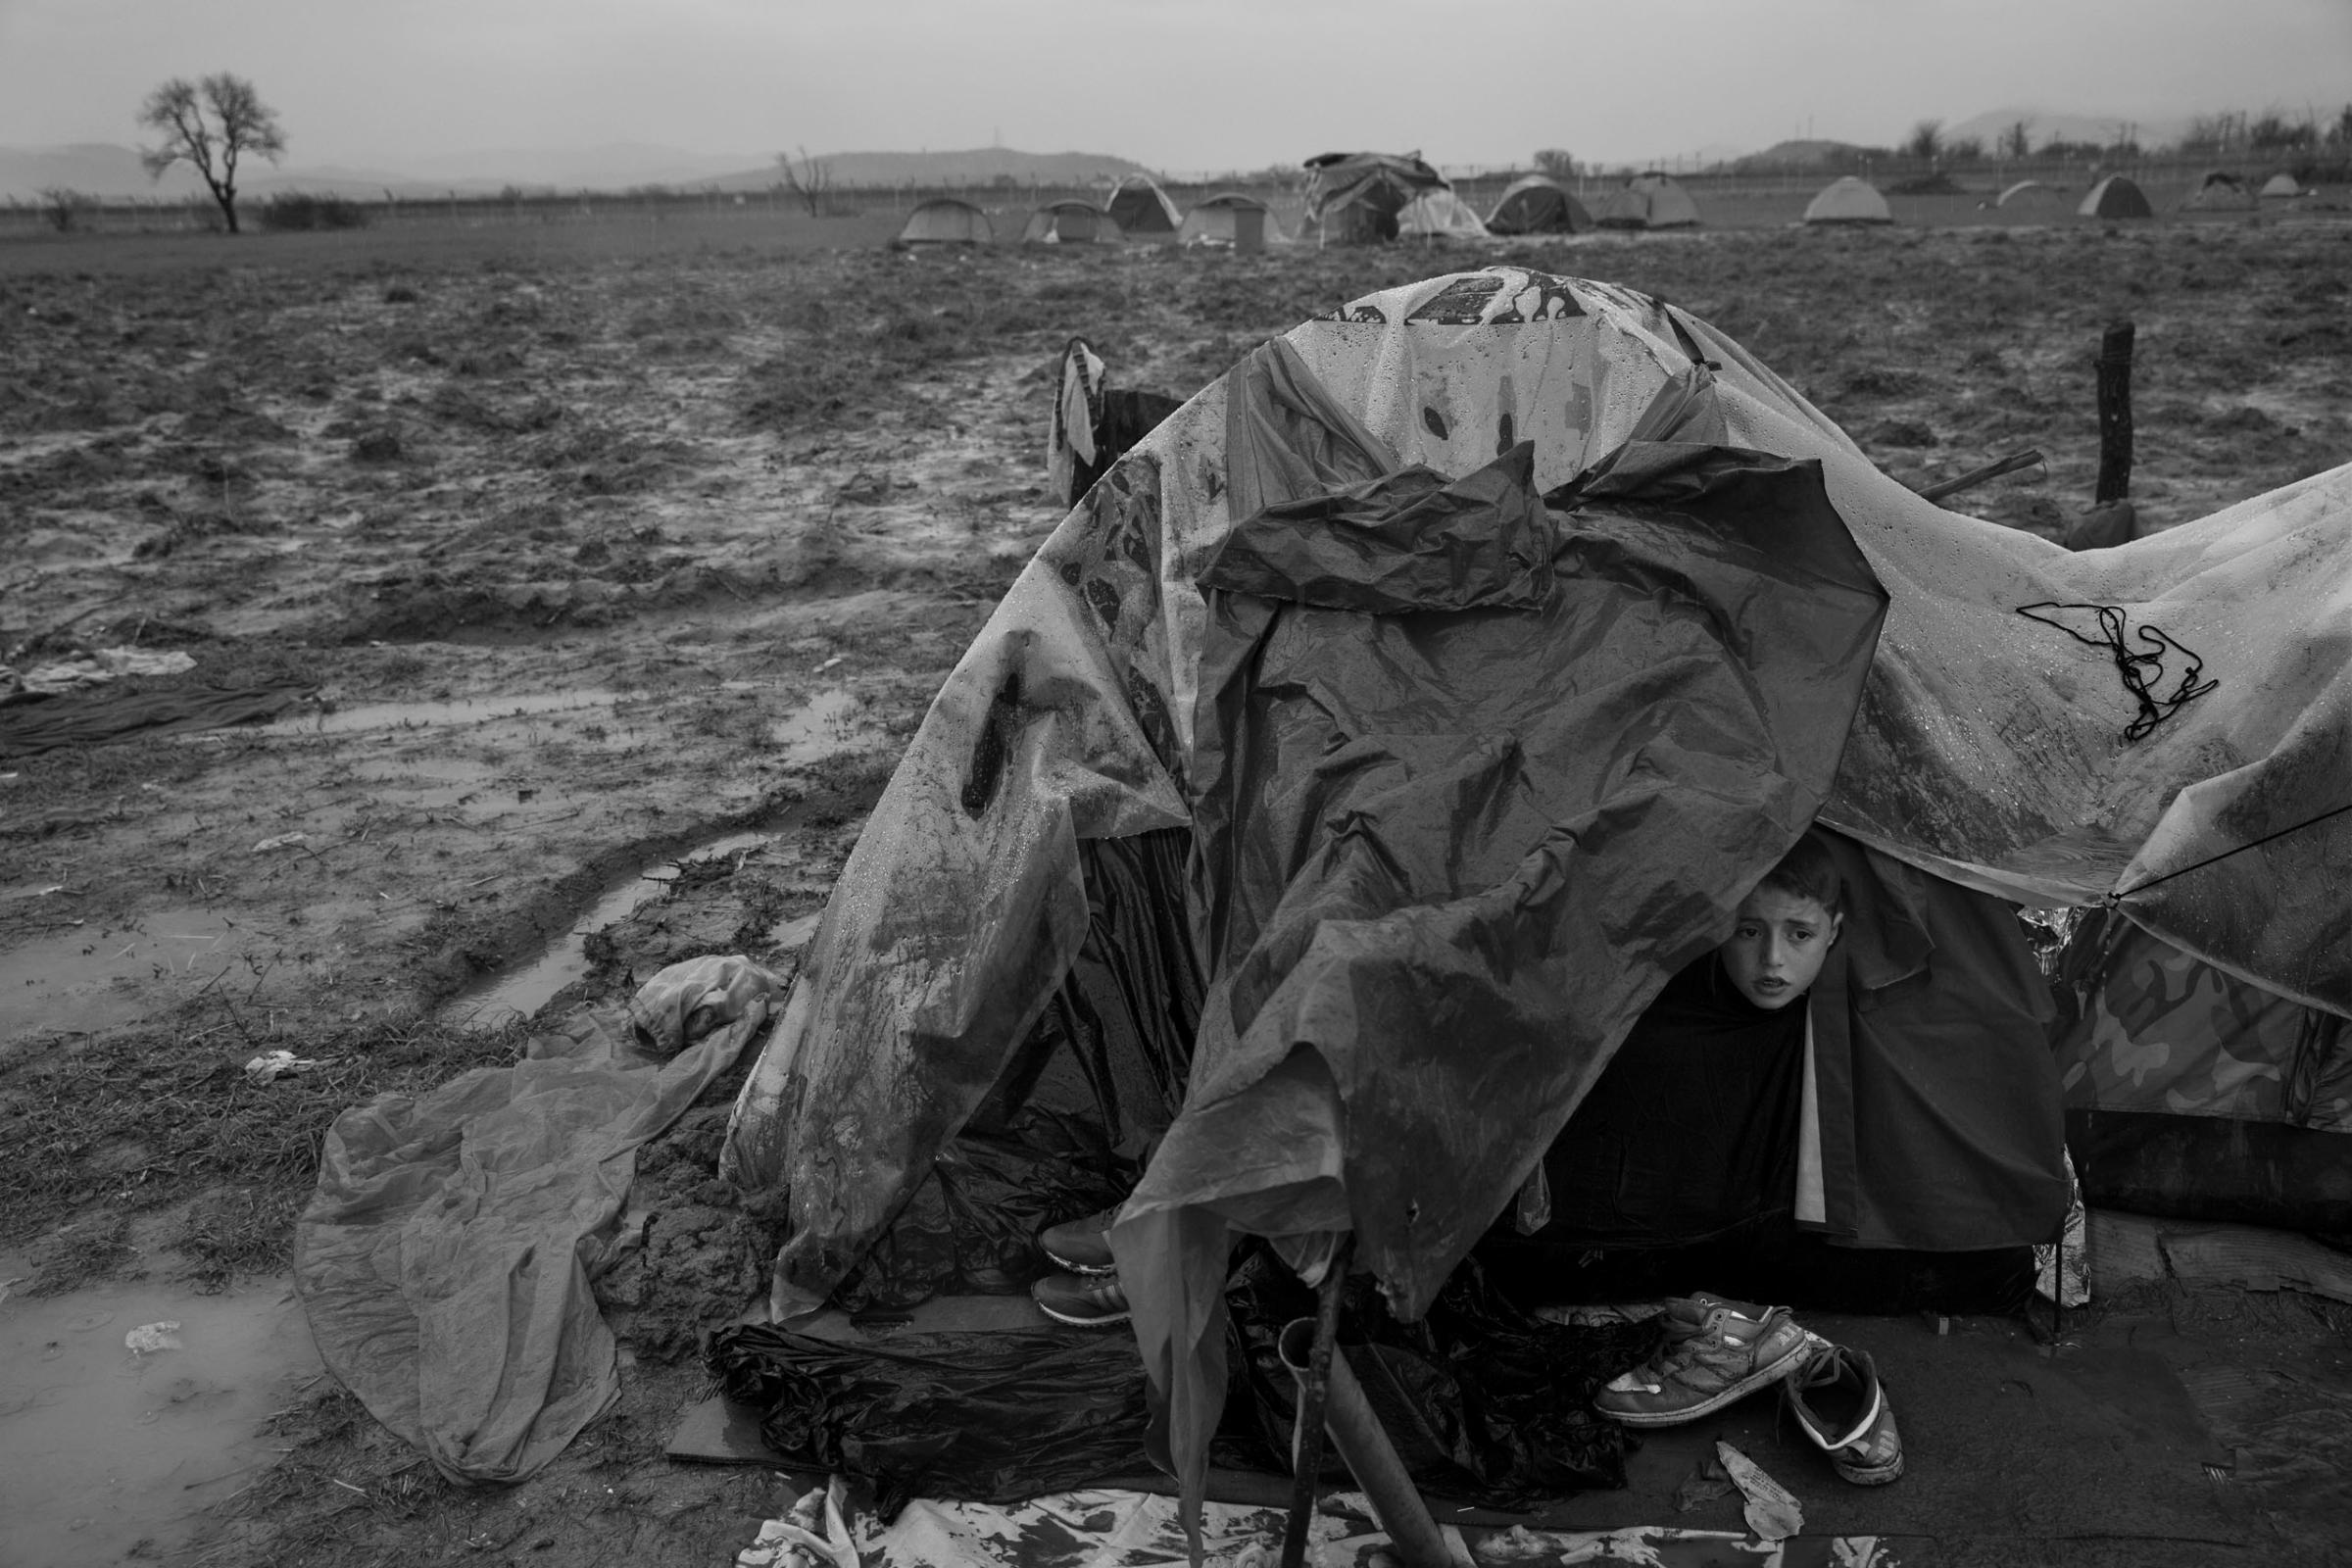 A boy peers out of a tent at a refugee camp in Greece at the Macedonian border, where 12,000 inhabitants—nearly all of them Syrians, Iraqis or Afghans—have been huddling in their shelters atop the mud, March 13, 2016.